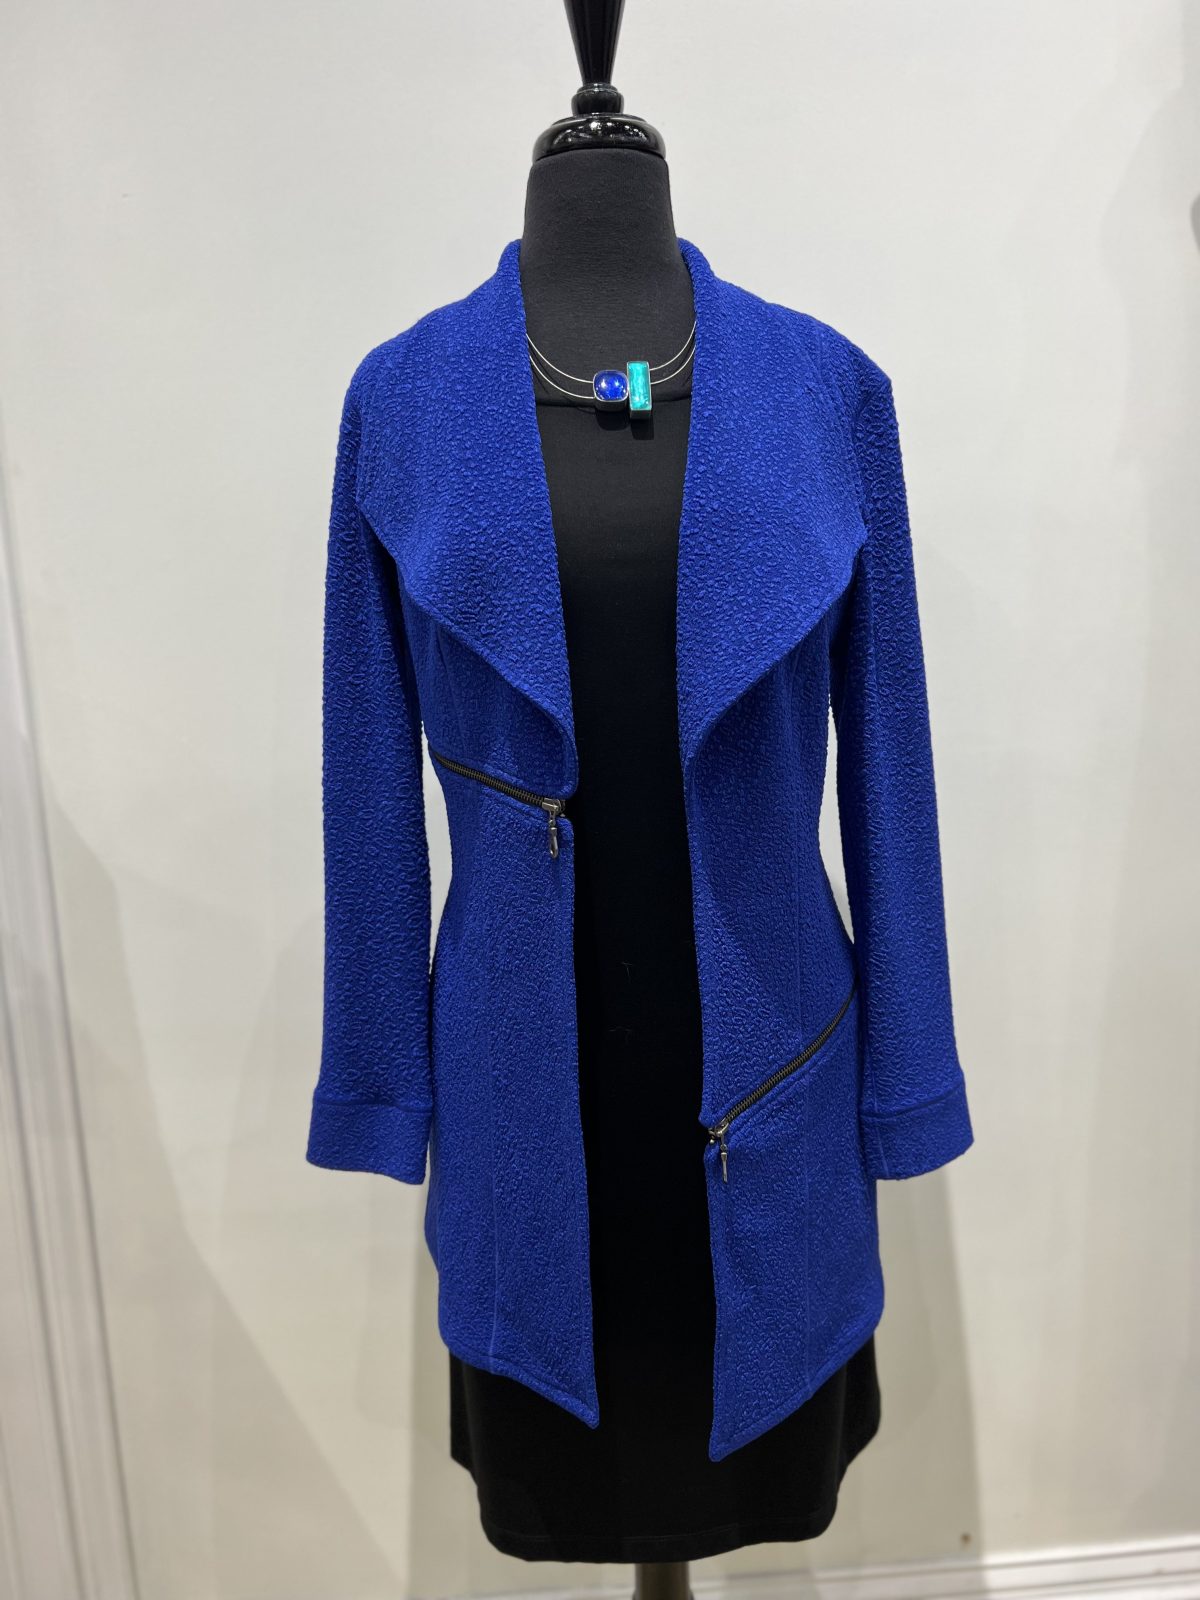 Eva Varro J12901 Monarch Long Barcelona Jacket with Zipper Detail | Ooh Ooh Shoes women's clothing and shoe boutique located in Naples